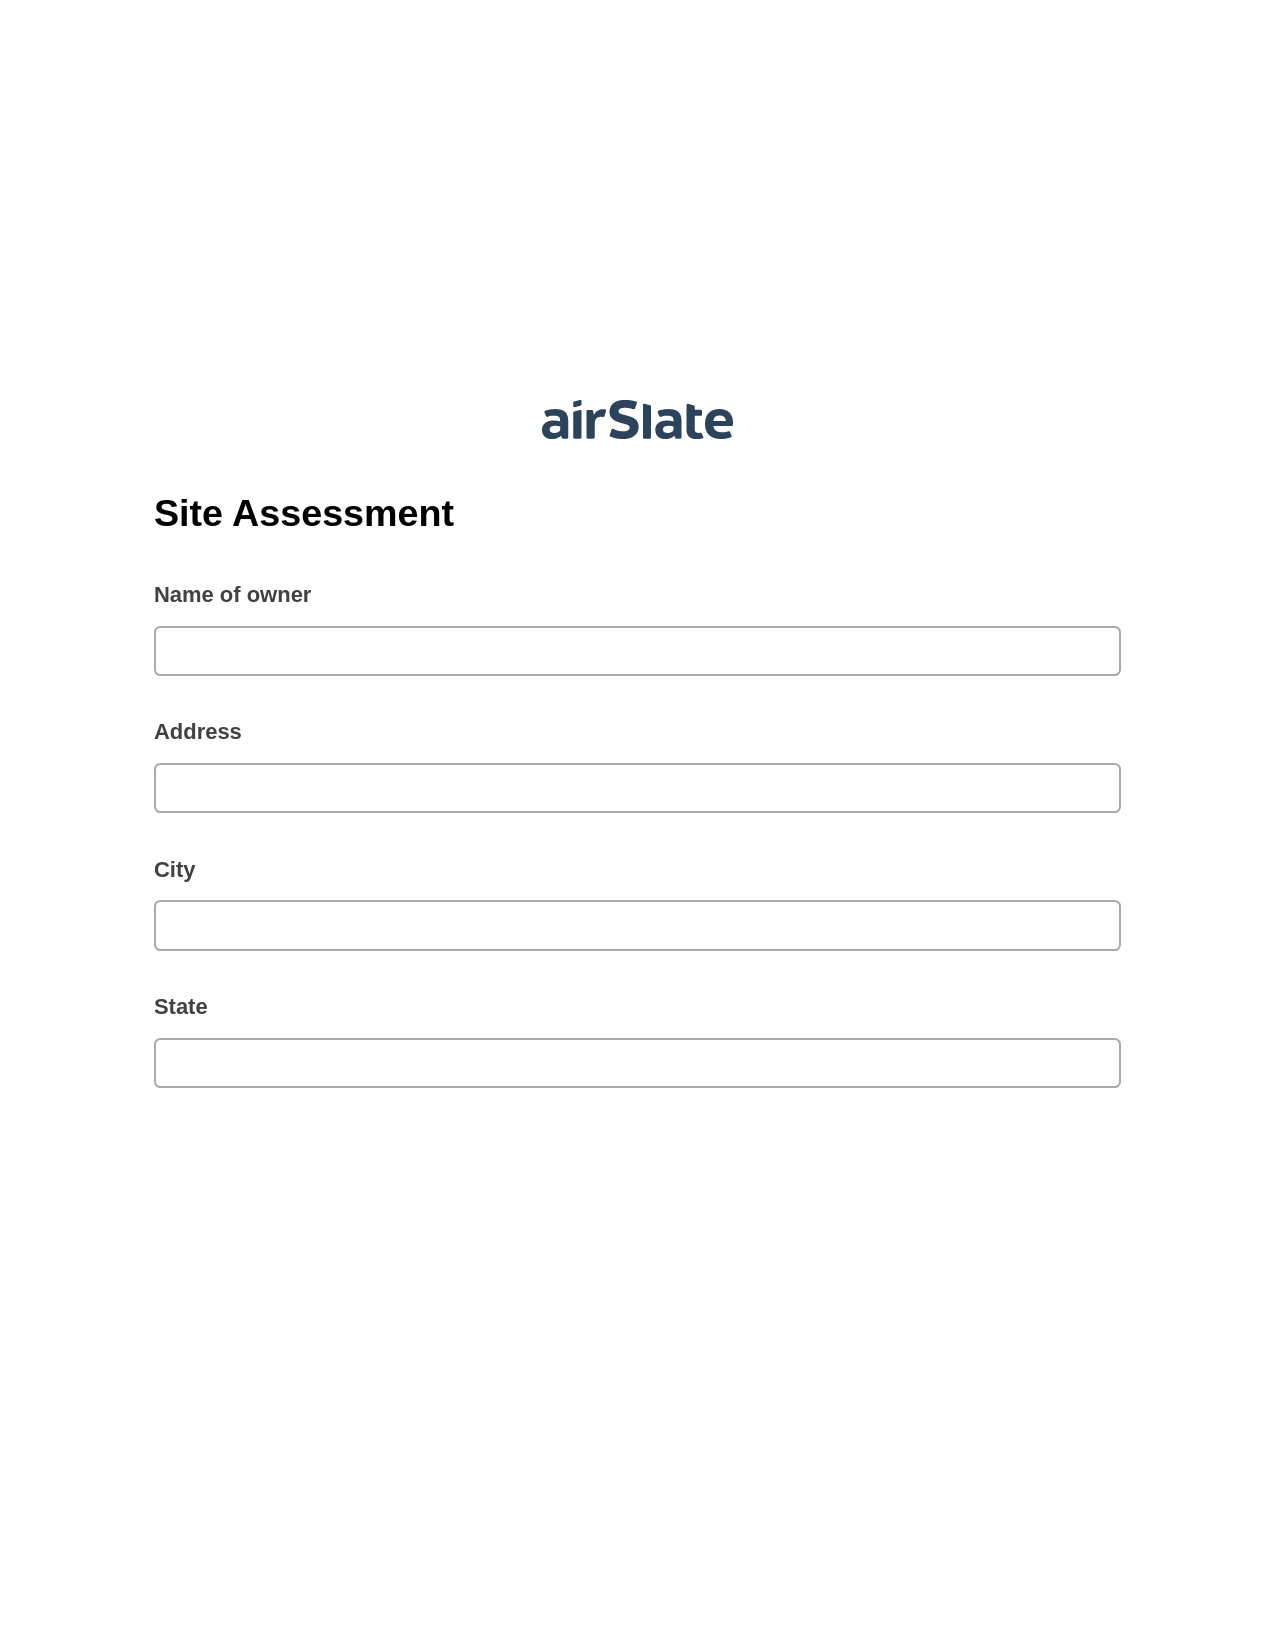 Site Assessment Pre-fill Dropdowns from Office 365 Excel Bot, Revoke Access Bot, Export to Google Sheet Bot